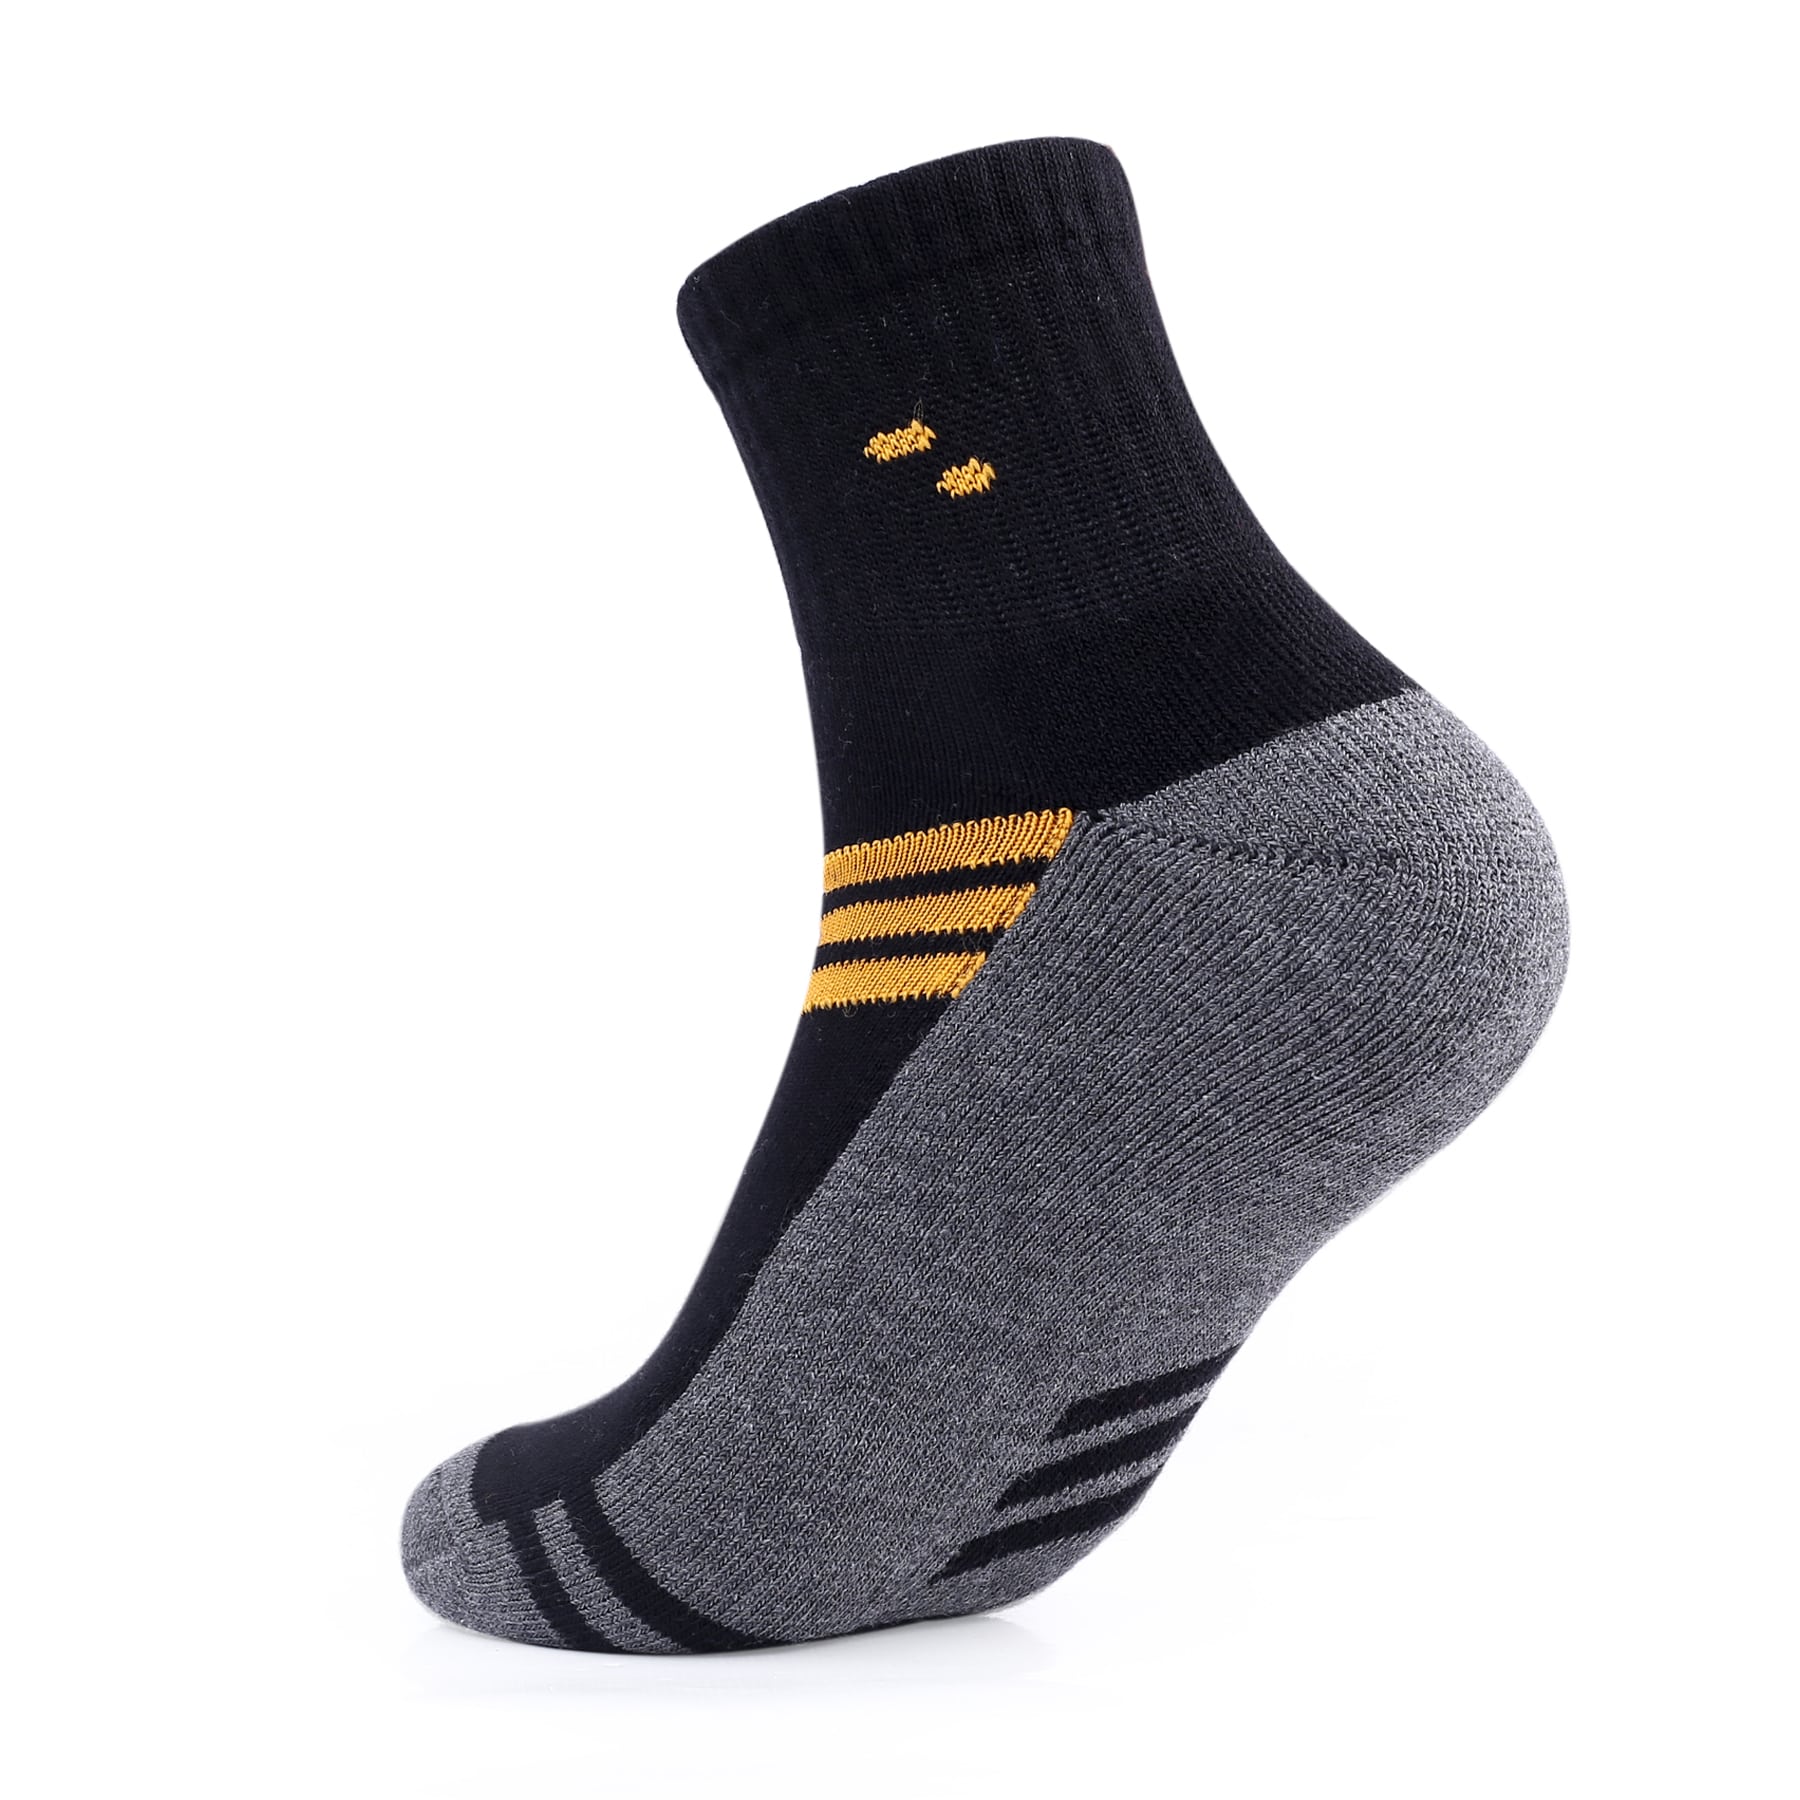 Bacca Bucci Combo of a 3 pair Sports Terry Socks